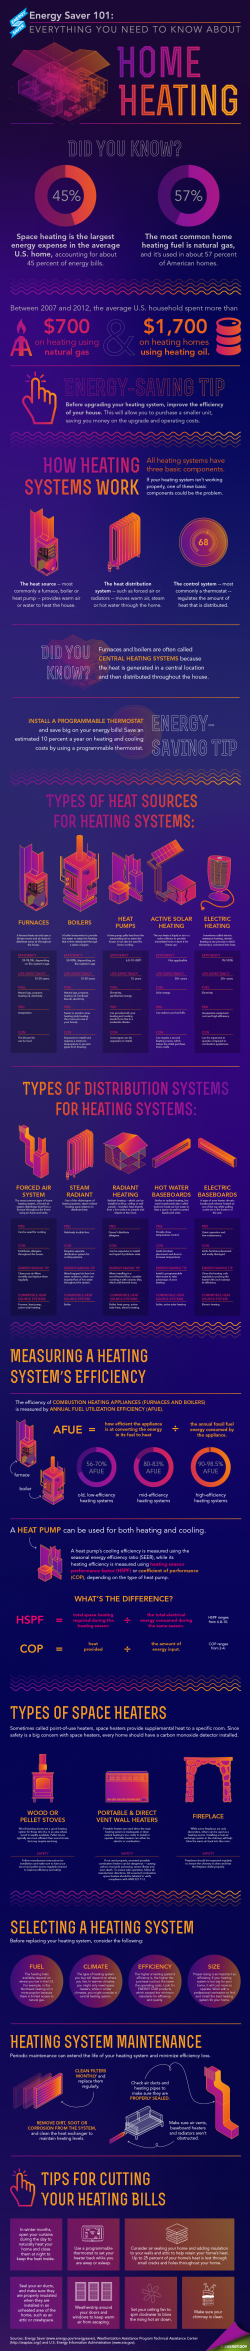 Our new Energy Saver 101 infographic lays out everything you need to know about home heating -- from how heating systems work and the different types on the market to what to look for when replacing your system and proper maintenance. Download a <a href="/node/784286">high-resolution version</a> of the infographic or individual sections. | Infographic by <a href="/node/379579">Sarah Gerrity</a>, Energy Department.